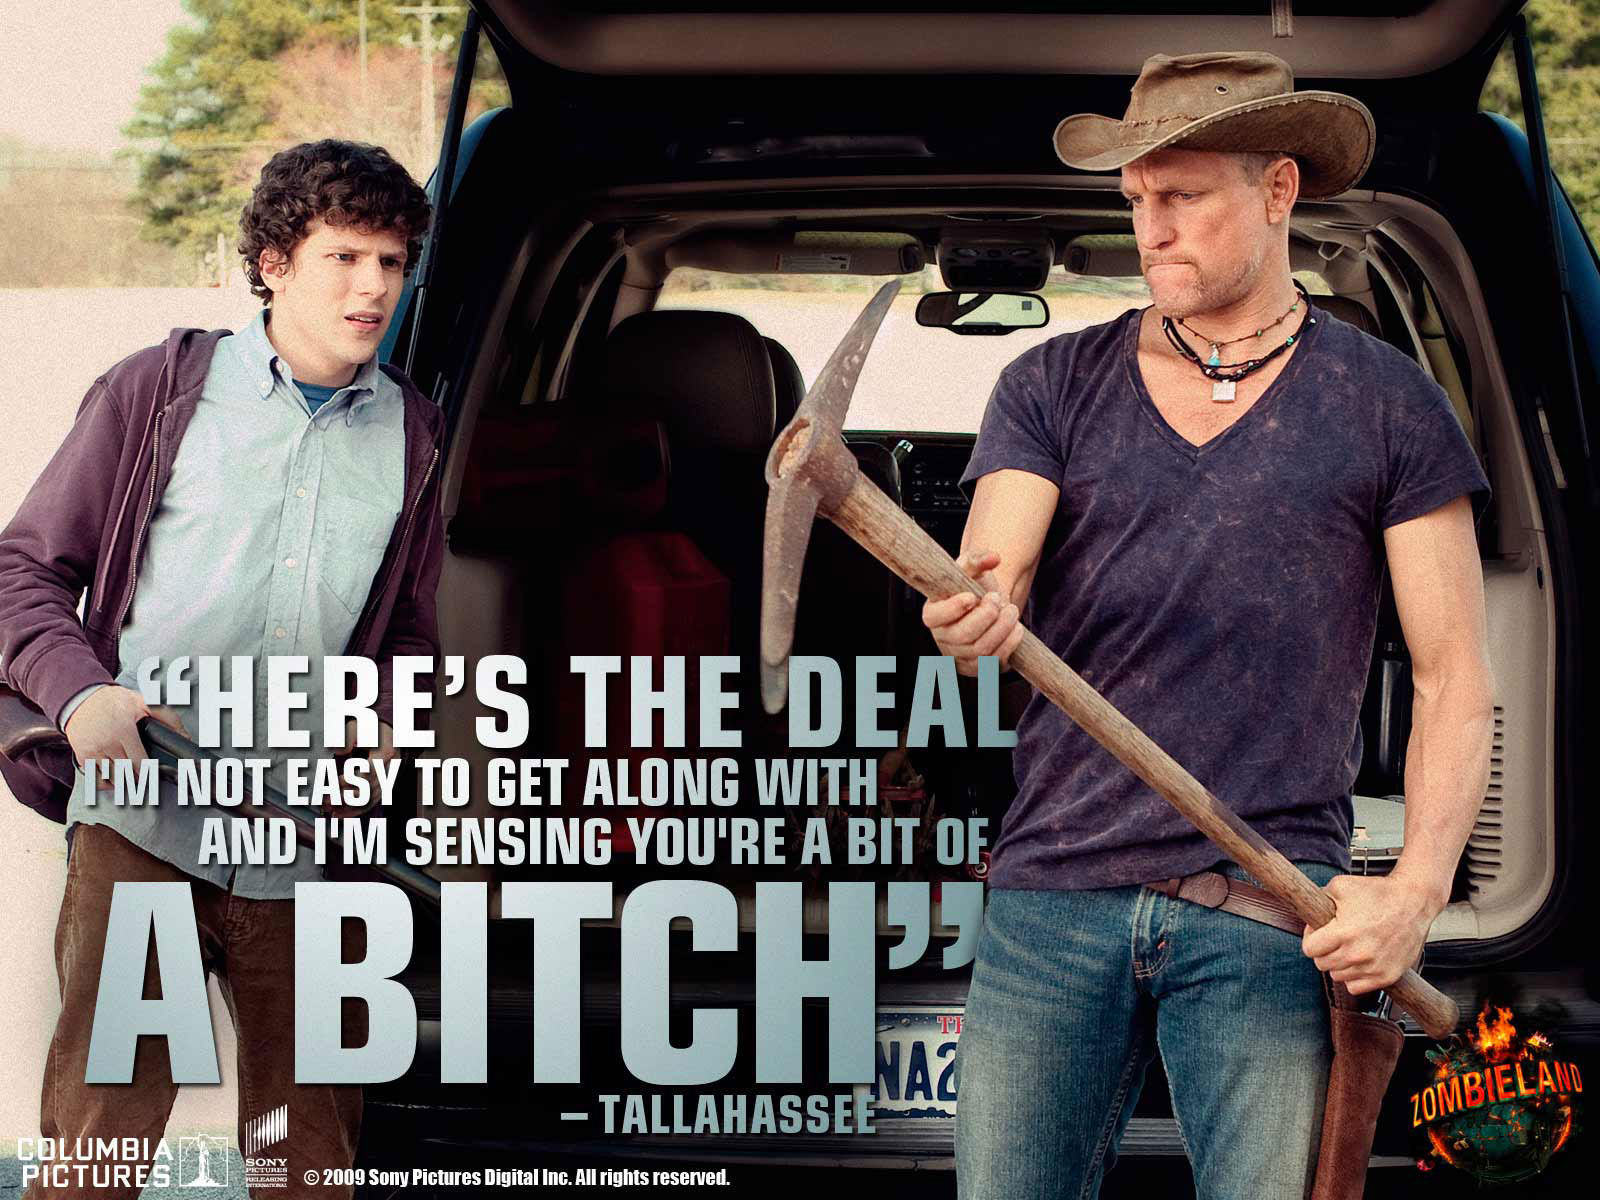 Zombieland Image Tallahassee Qoutes HD Wallpaper And Background